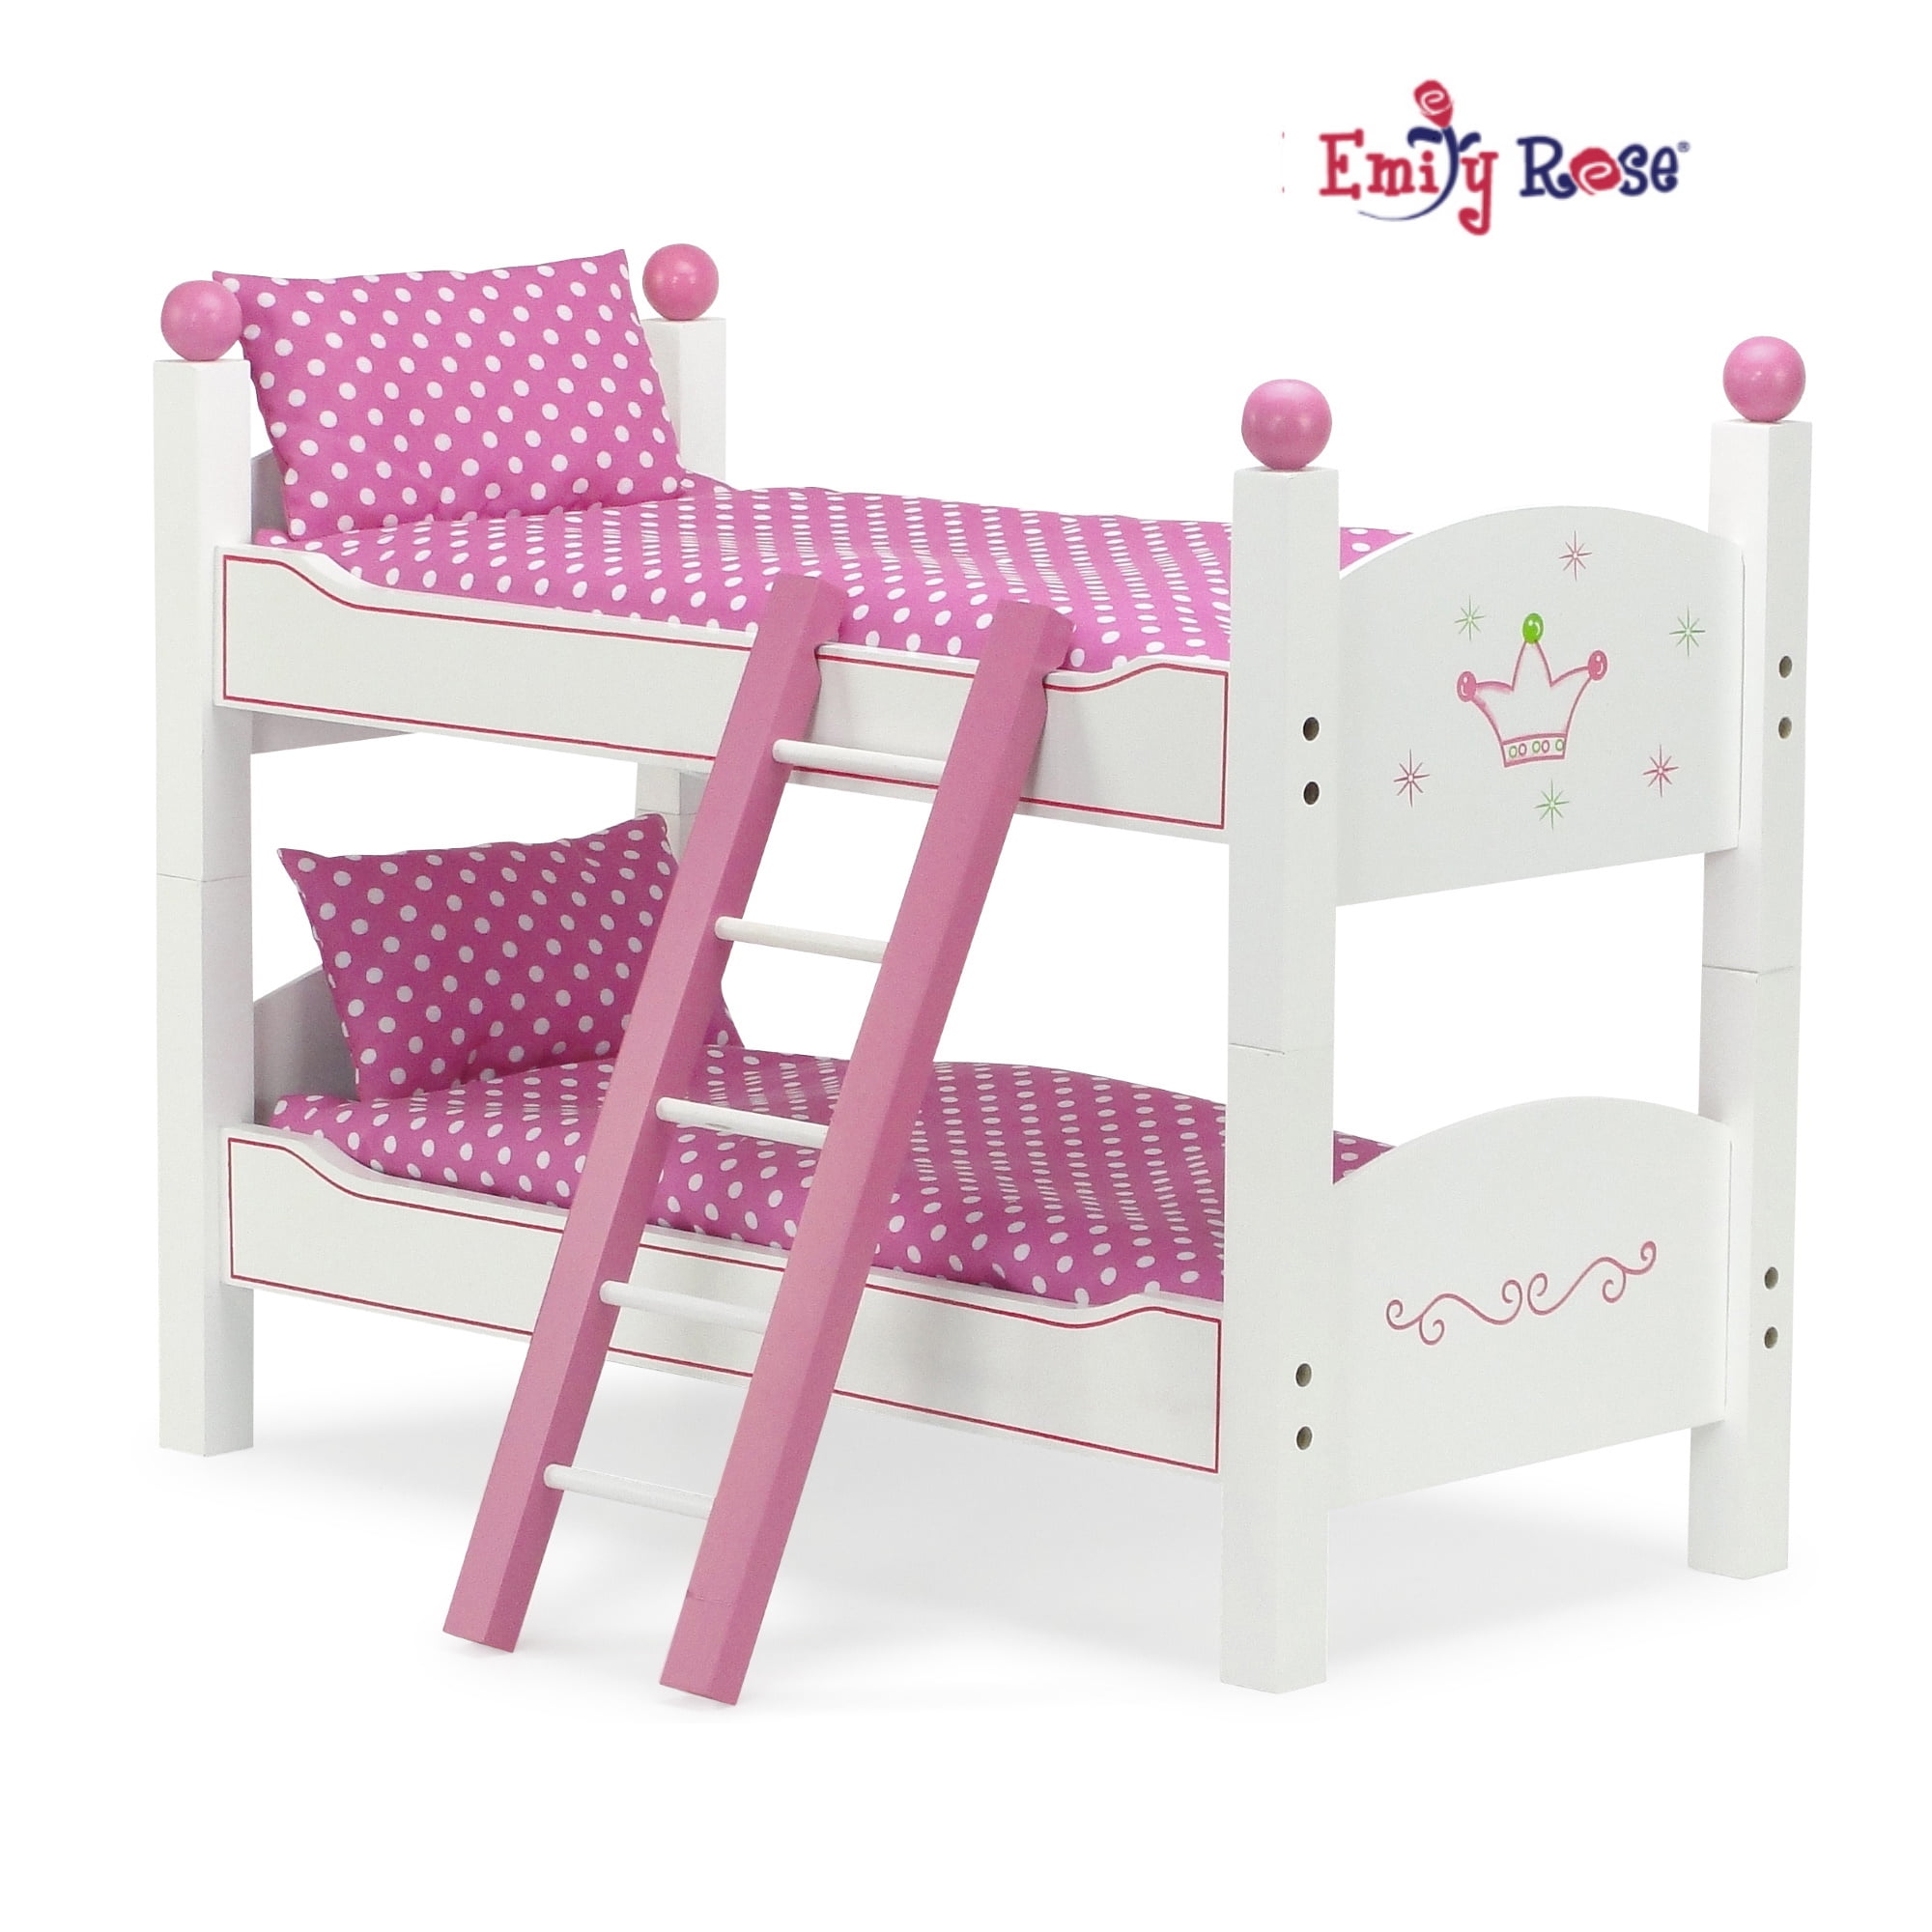 Emily Rose 18 Inch Doll Bunk Bed, American Girl Travel Case With Bunk Bed